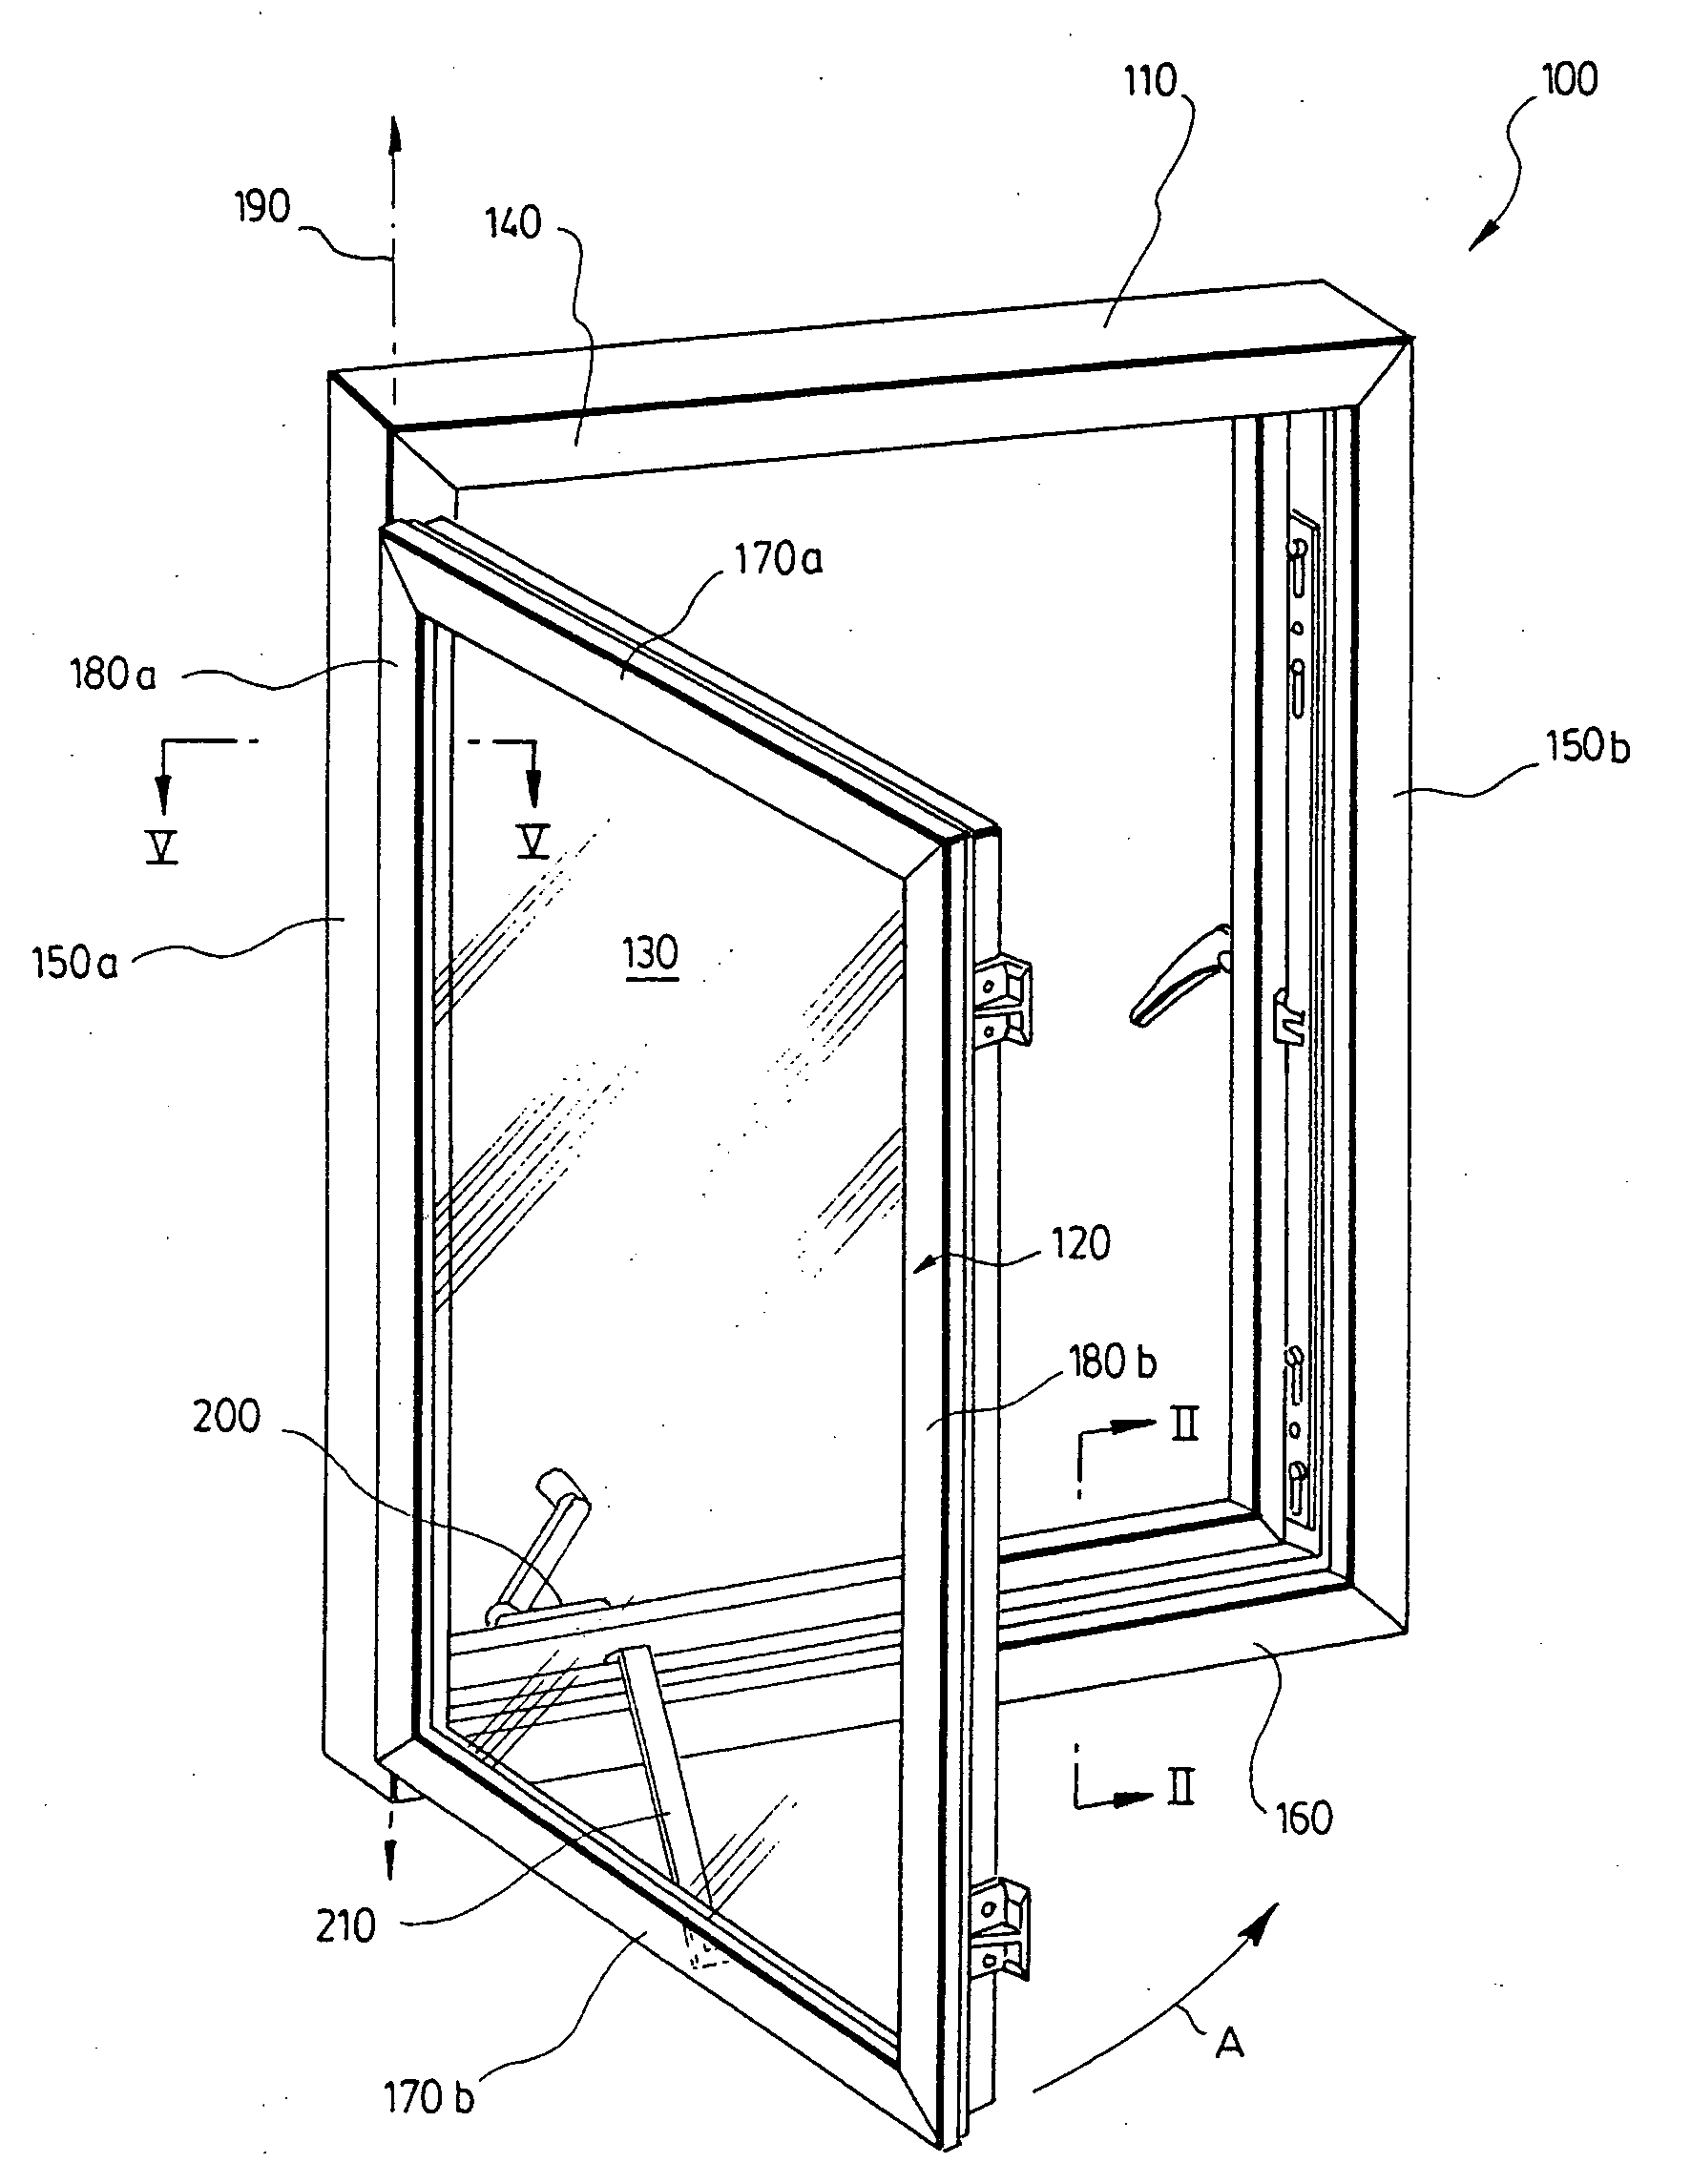 Plastic window frame covered with aluminum sheet for providing colourable surface